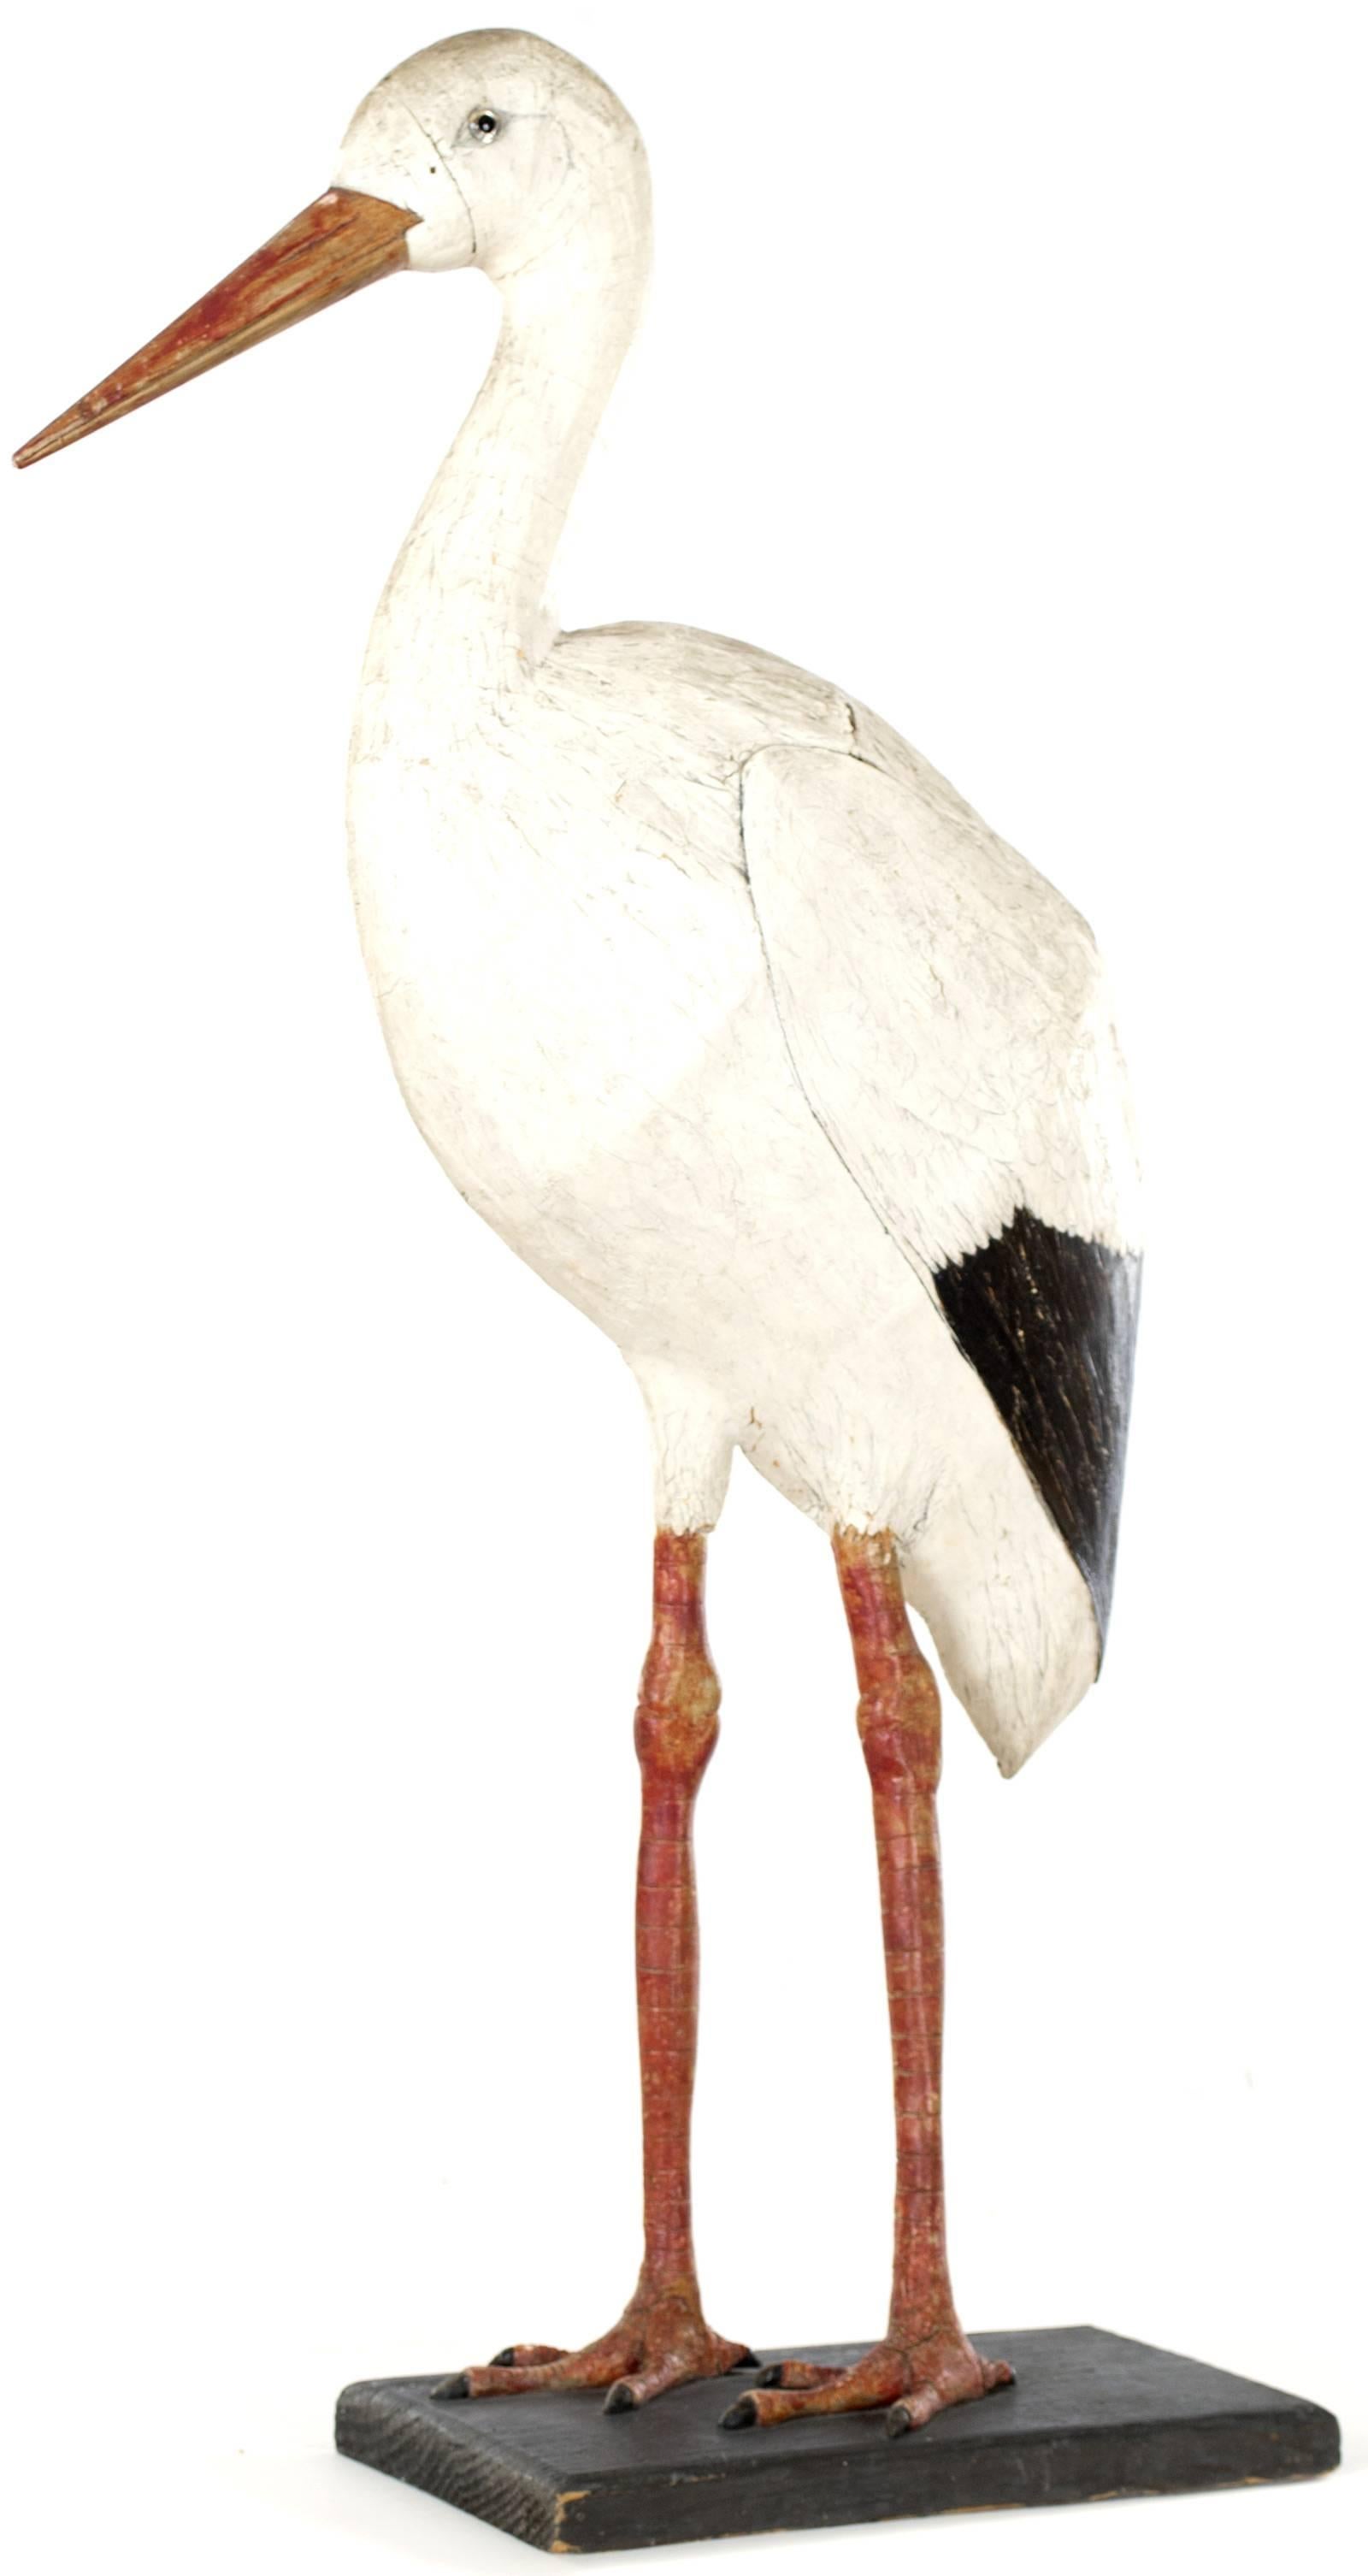 A very finely made, life-sized sculpture of a stork, carved in wood and beautifully painted in lifelike colors. Writing on the reverse in German reads: 